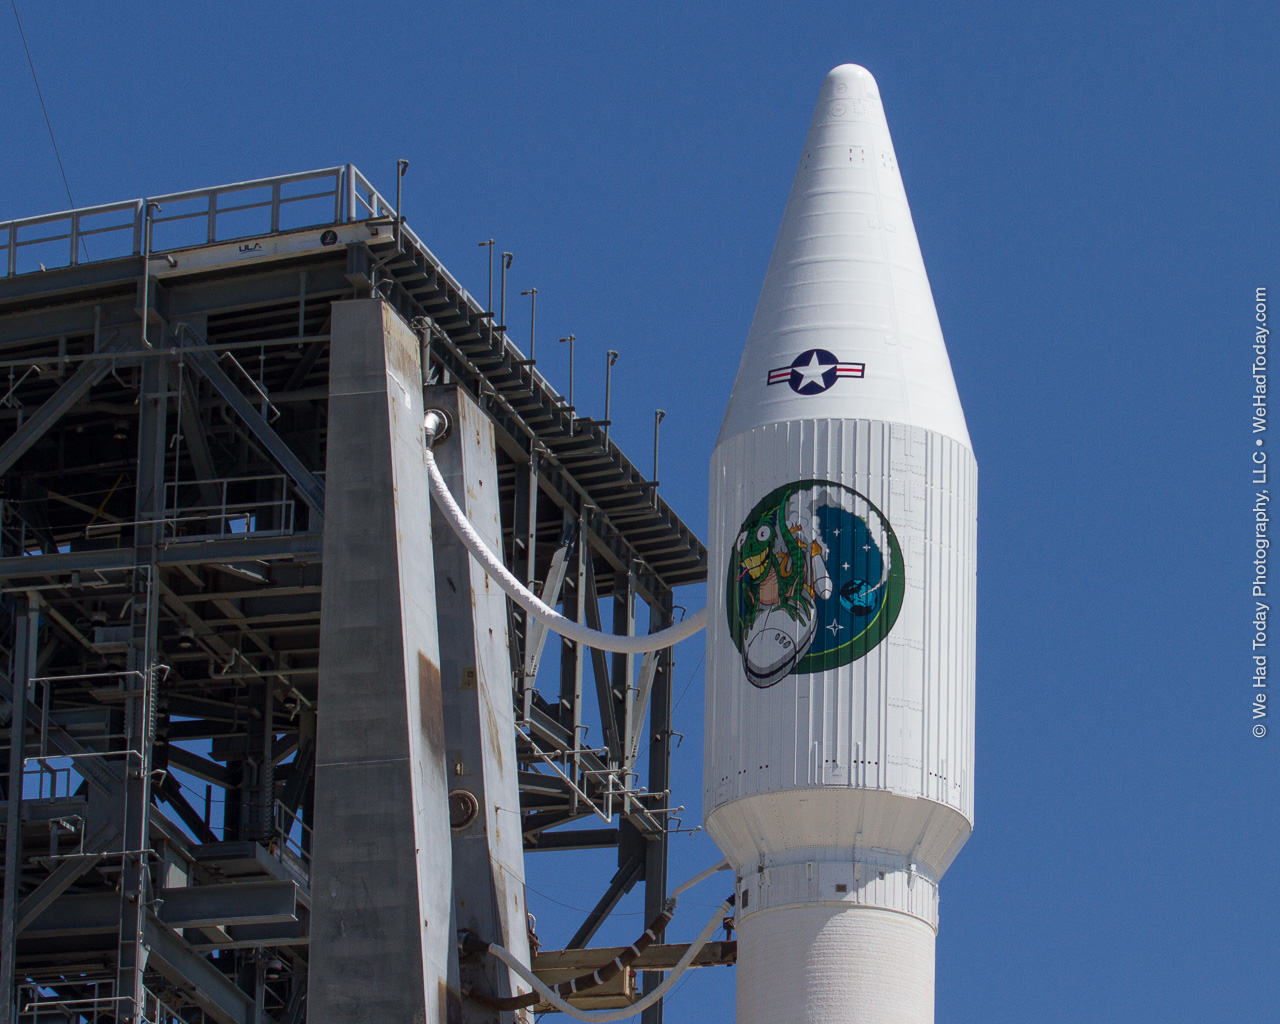 The payload fairing of the Atlas V rocket is decorated with 'Spike,' the mascot for the NRO L-61 mission.